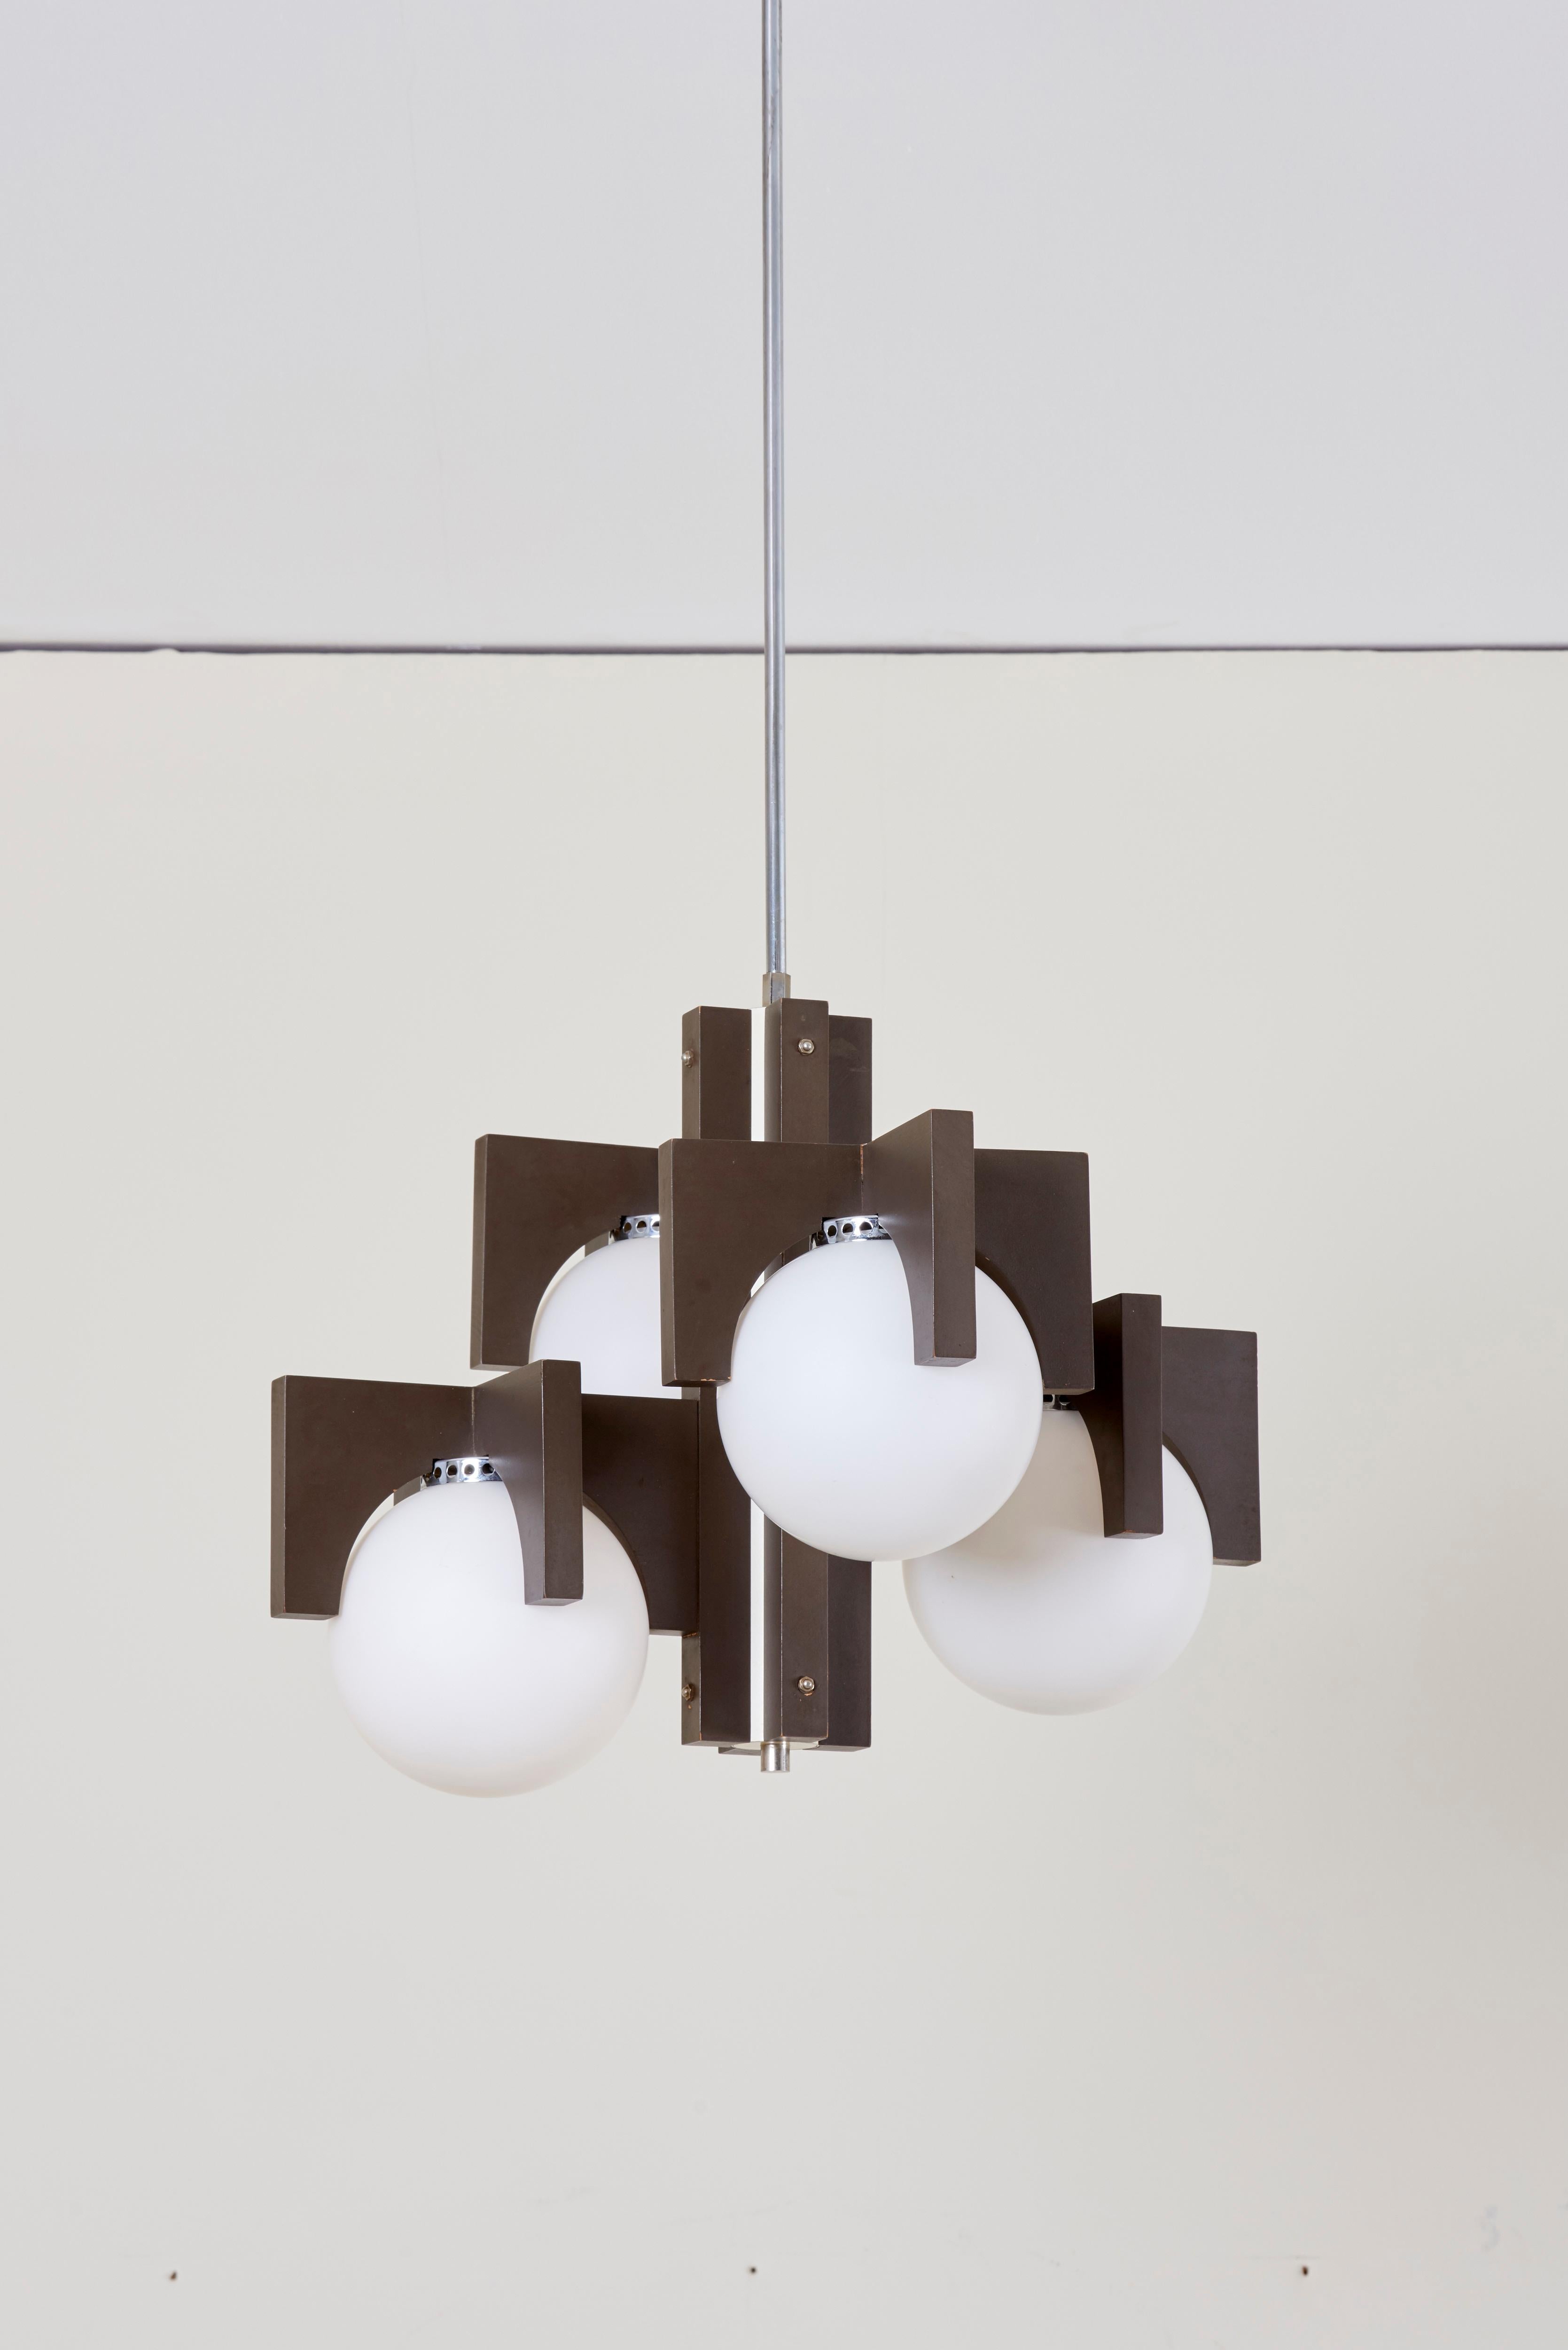 Architectural pendant lamp or chandelier in wood and metal.
4 x E14 bulbs.

To be on the safe side, the lamp should be checked locally by a specialist concerning local requirements.